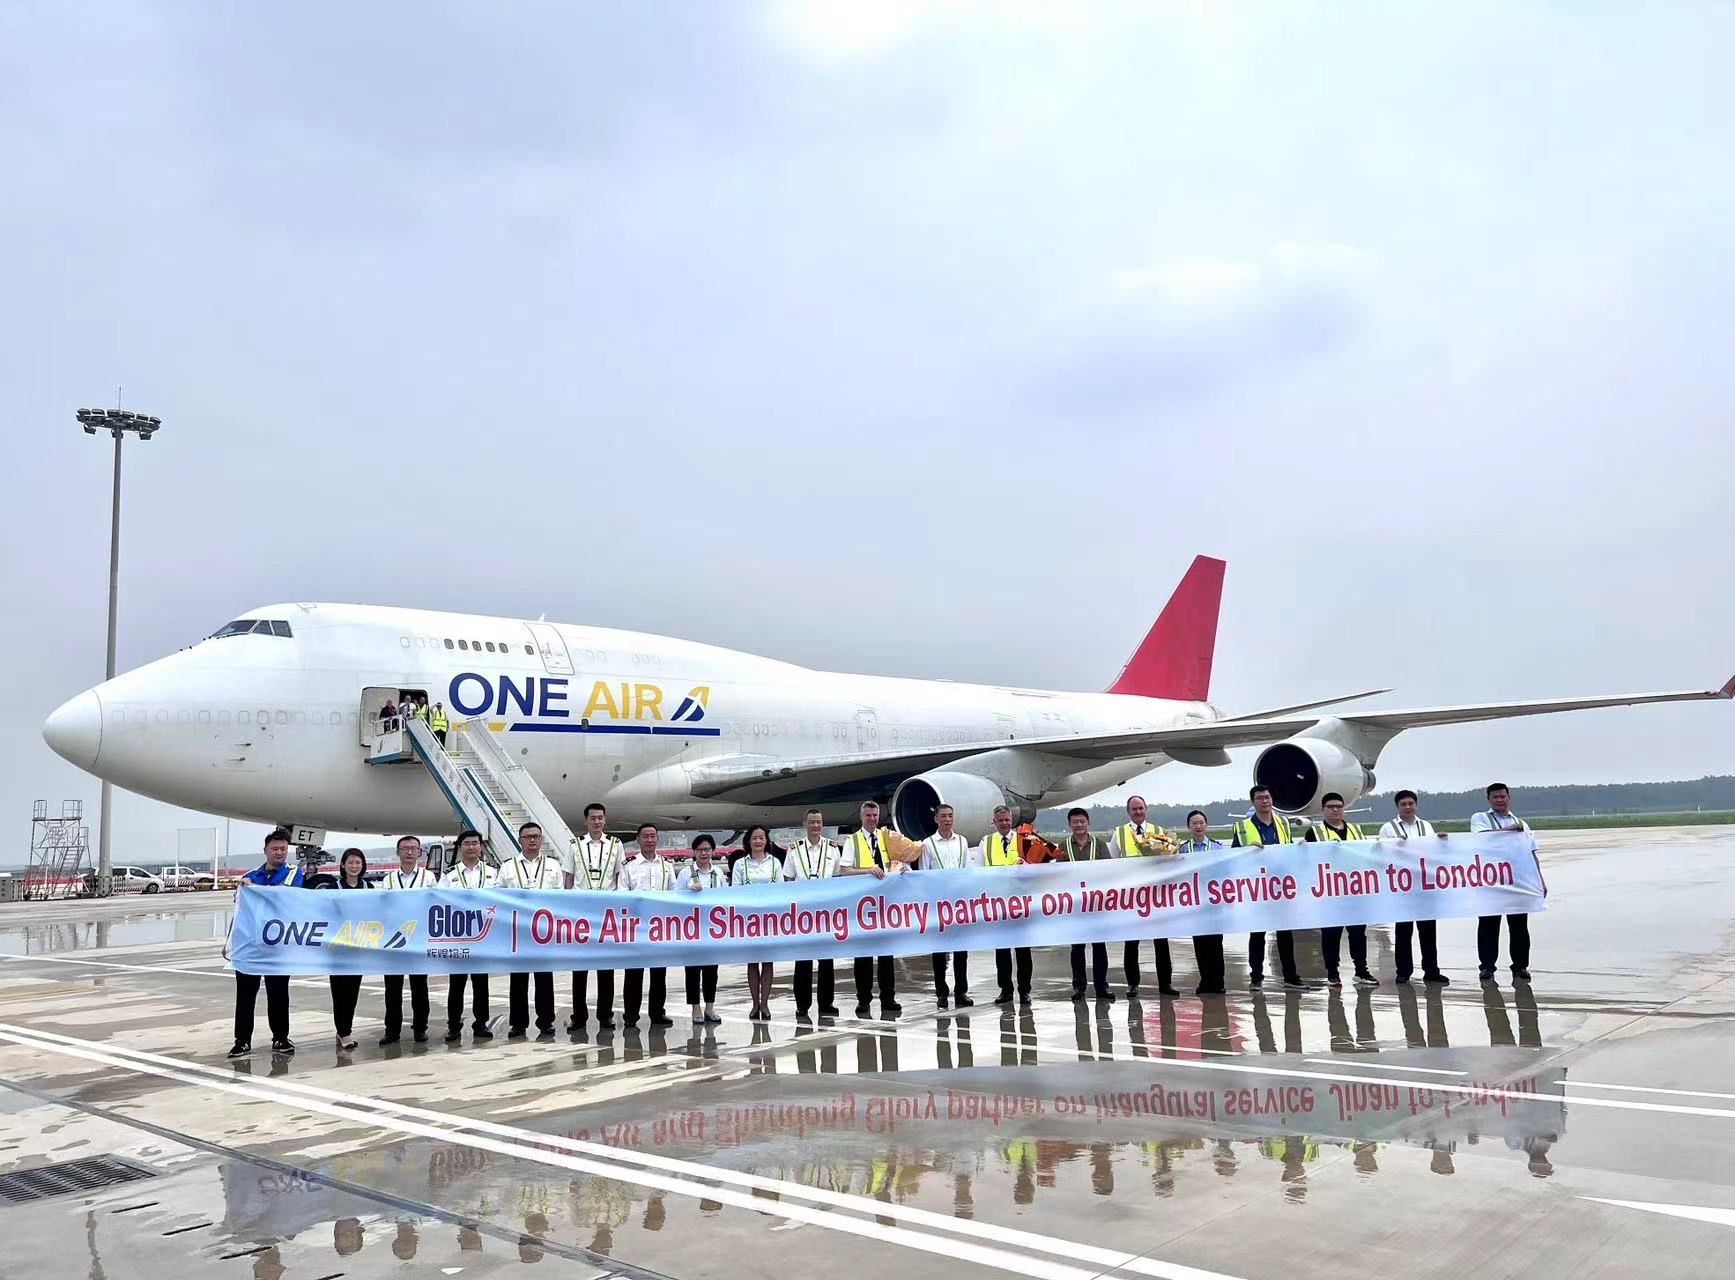 One Air's first commercial 747F flight prepares to depart from Jinan-Shandong